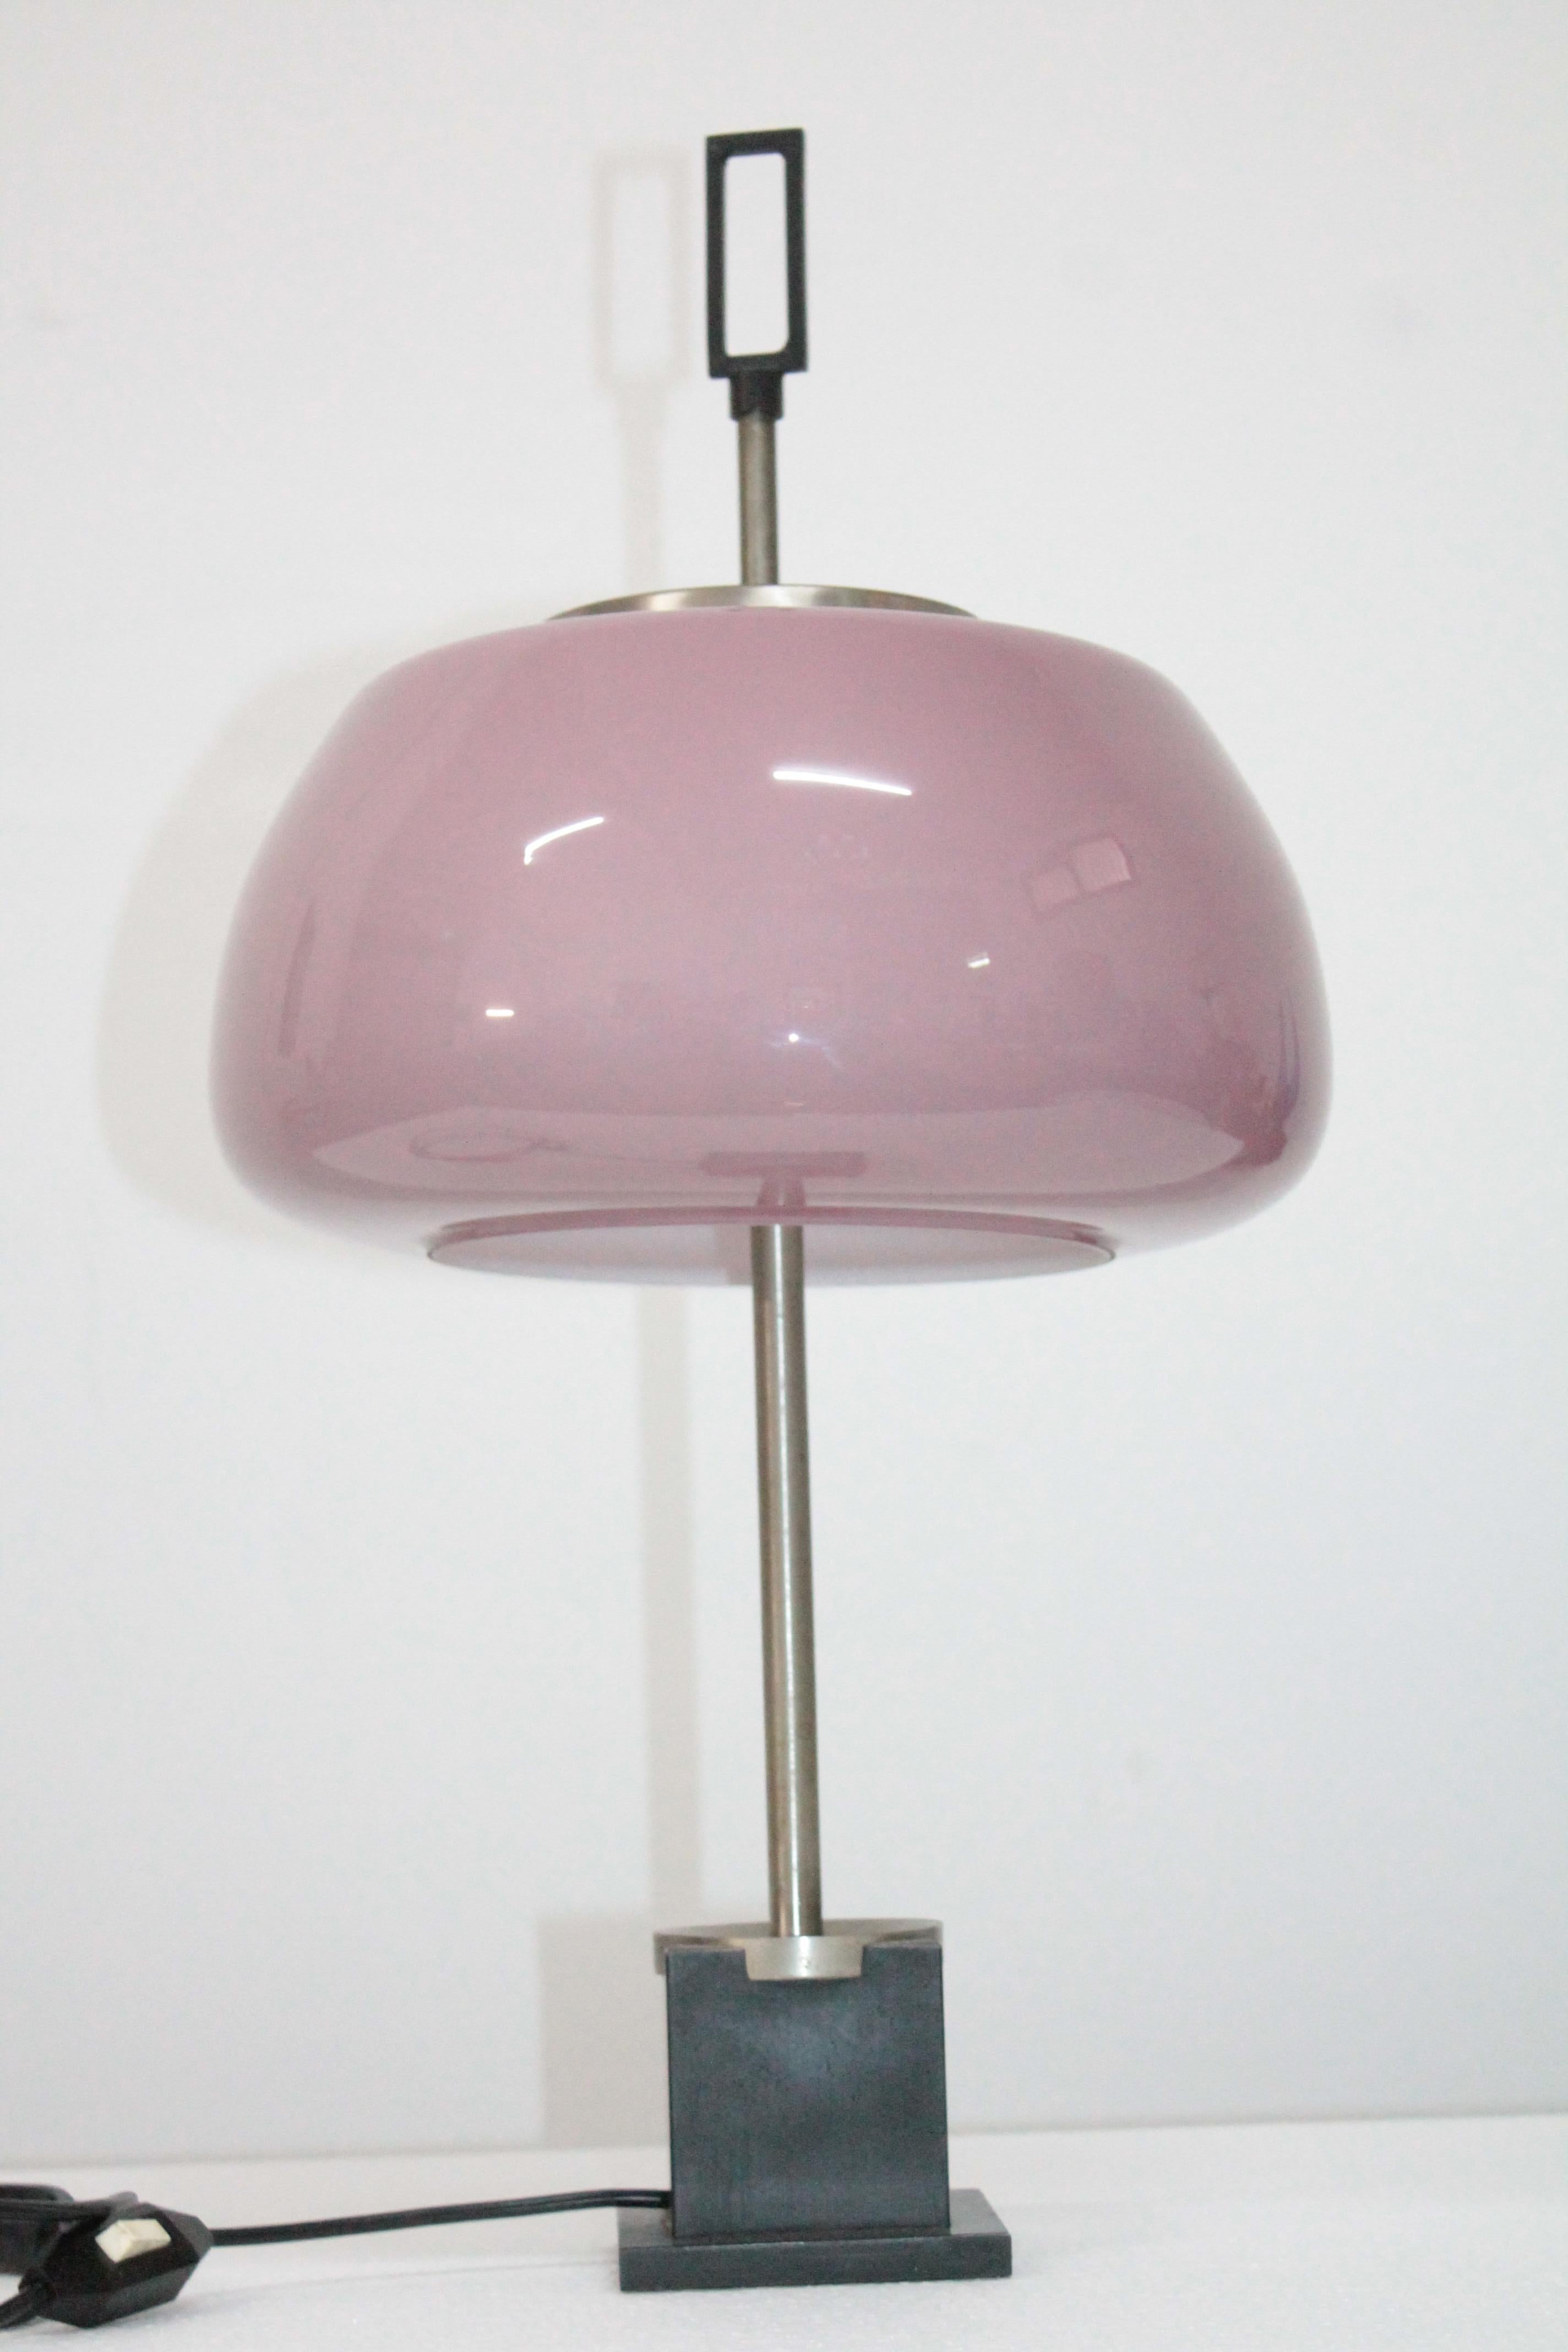 A table lamp designed by Oscar Torlasco and produced by Lumi. Black cast iron base with chrome insert and up-stand with opaline glass shade. 
Italian 1950s.
H:53cm Glass Shade 28cm x 16cm.